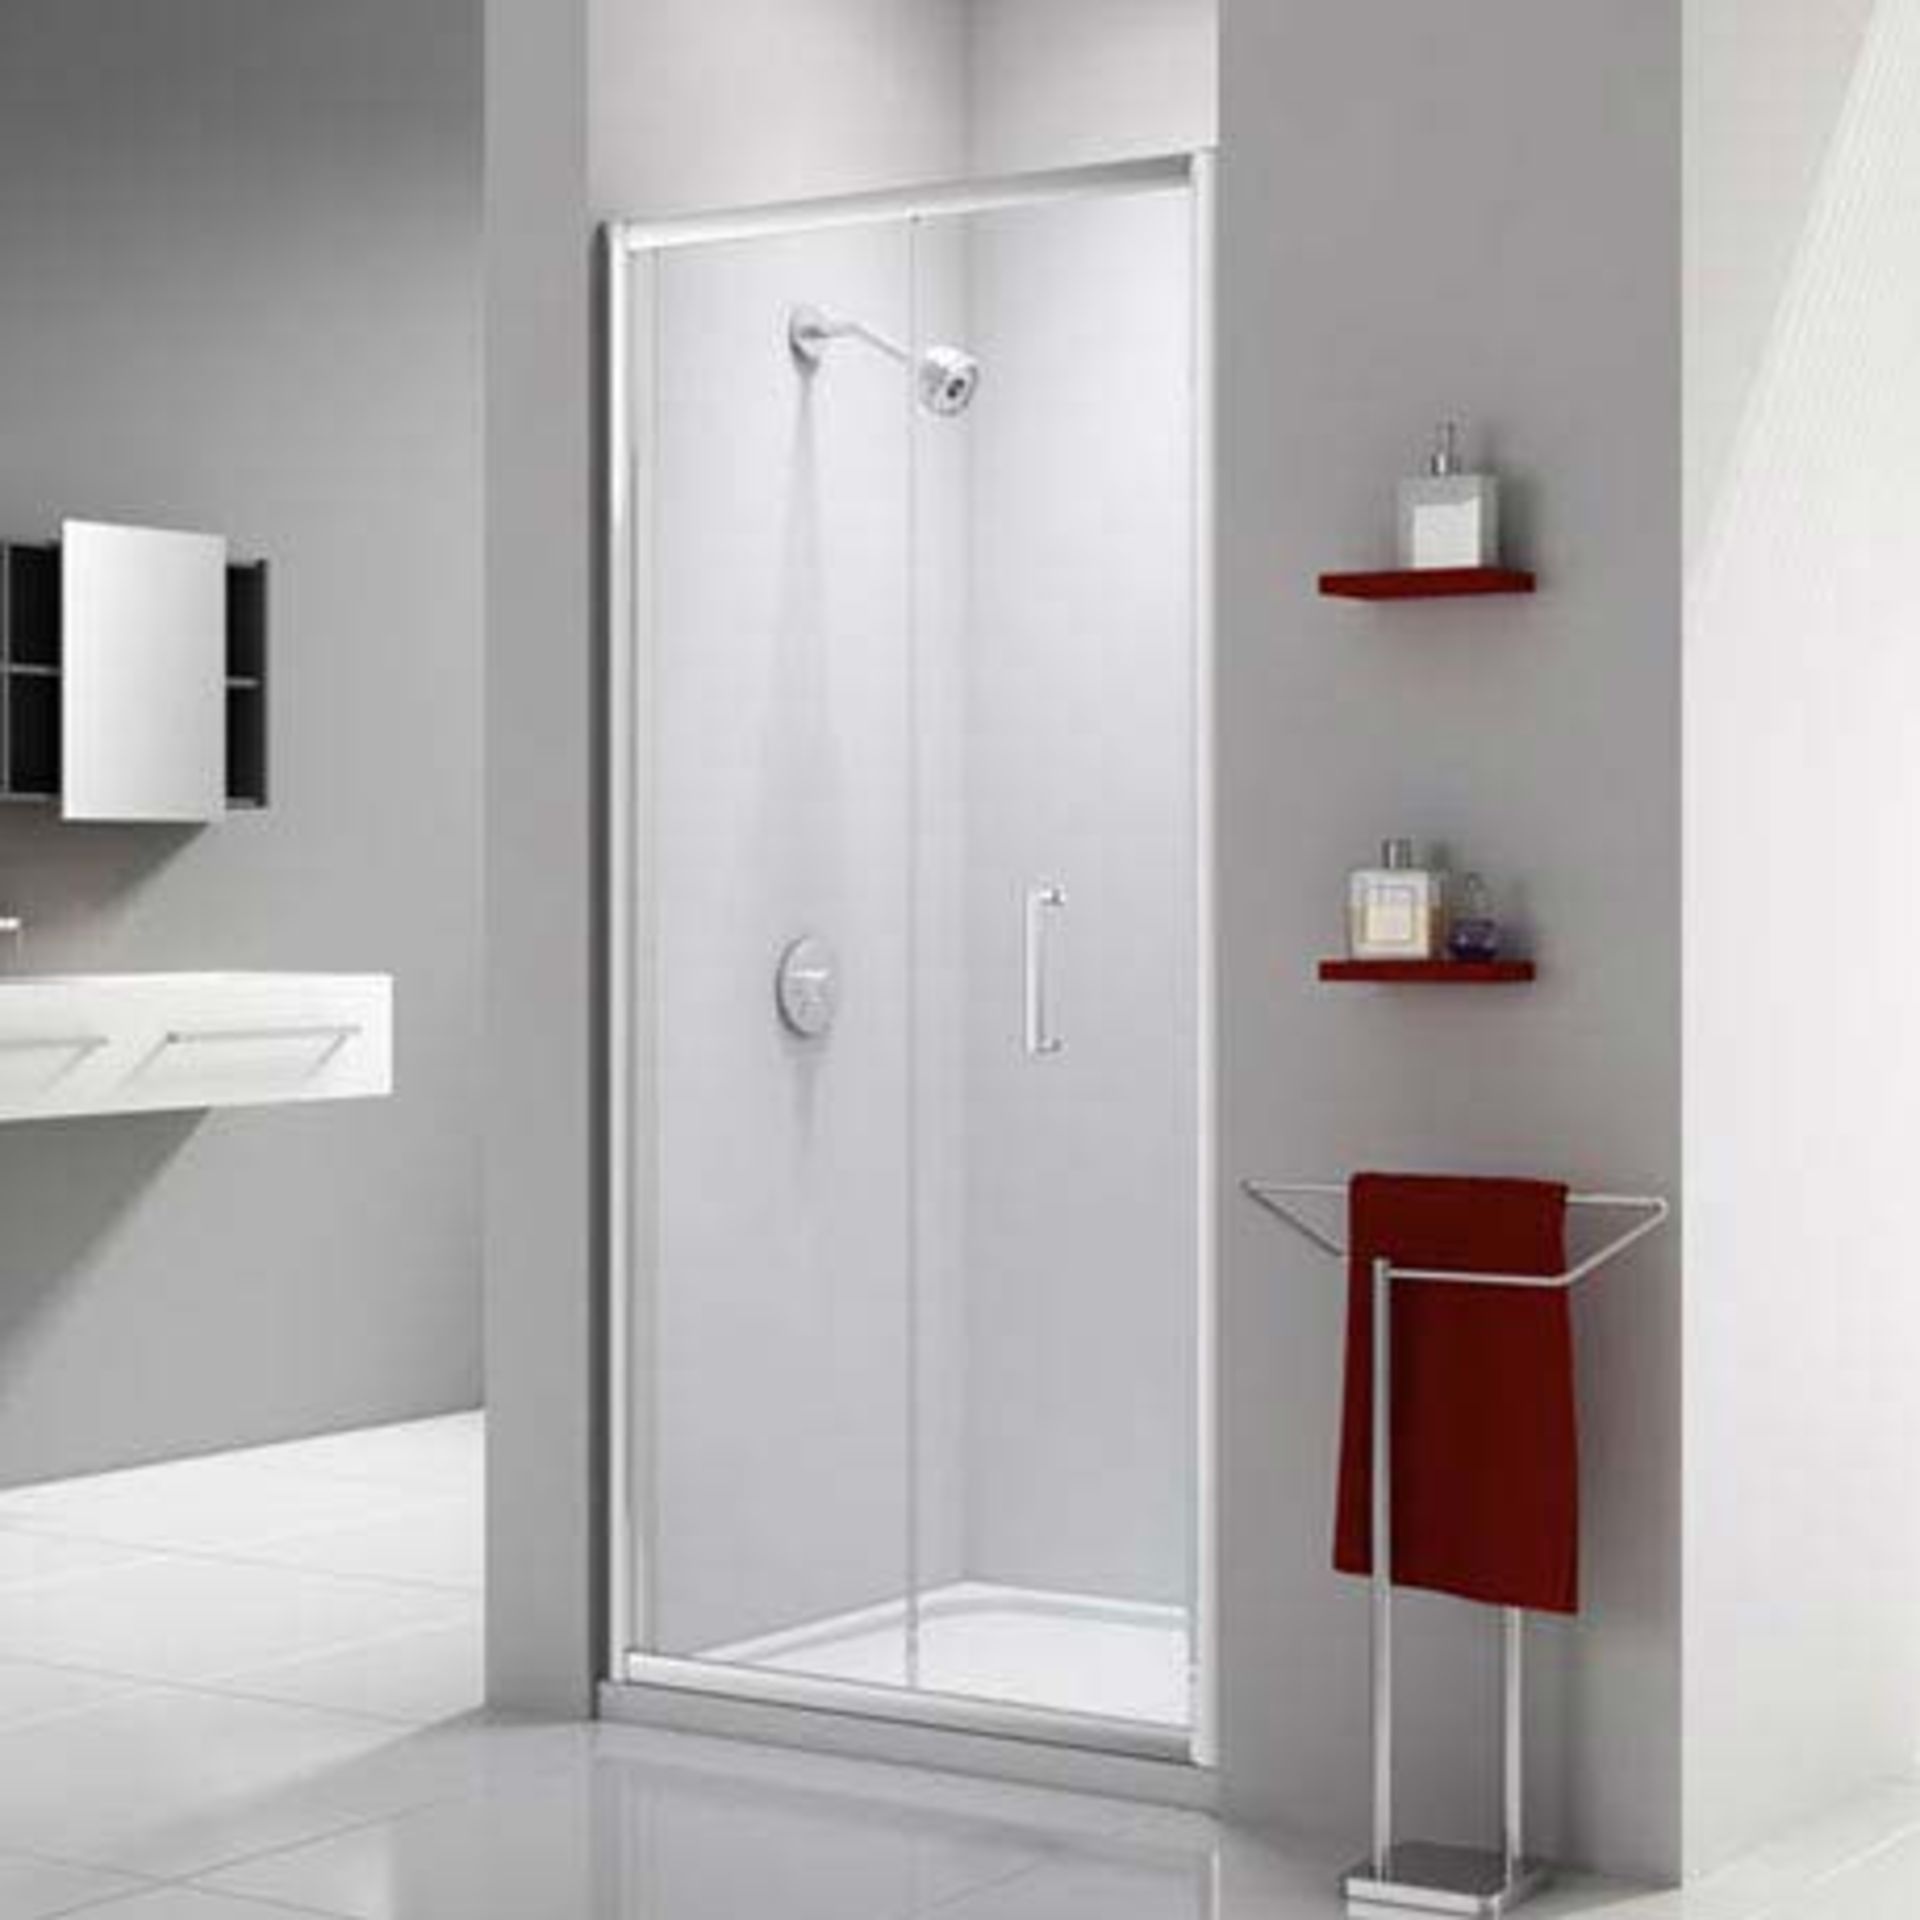 (RR113) 760mm Silver Bi-Fold door. RRP £299.99.Create a stunning shower enclosure with these elegant